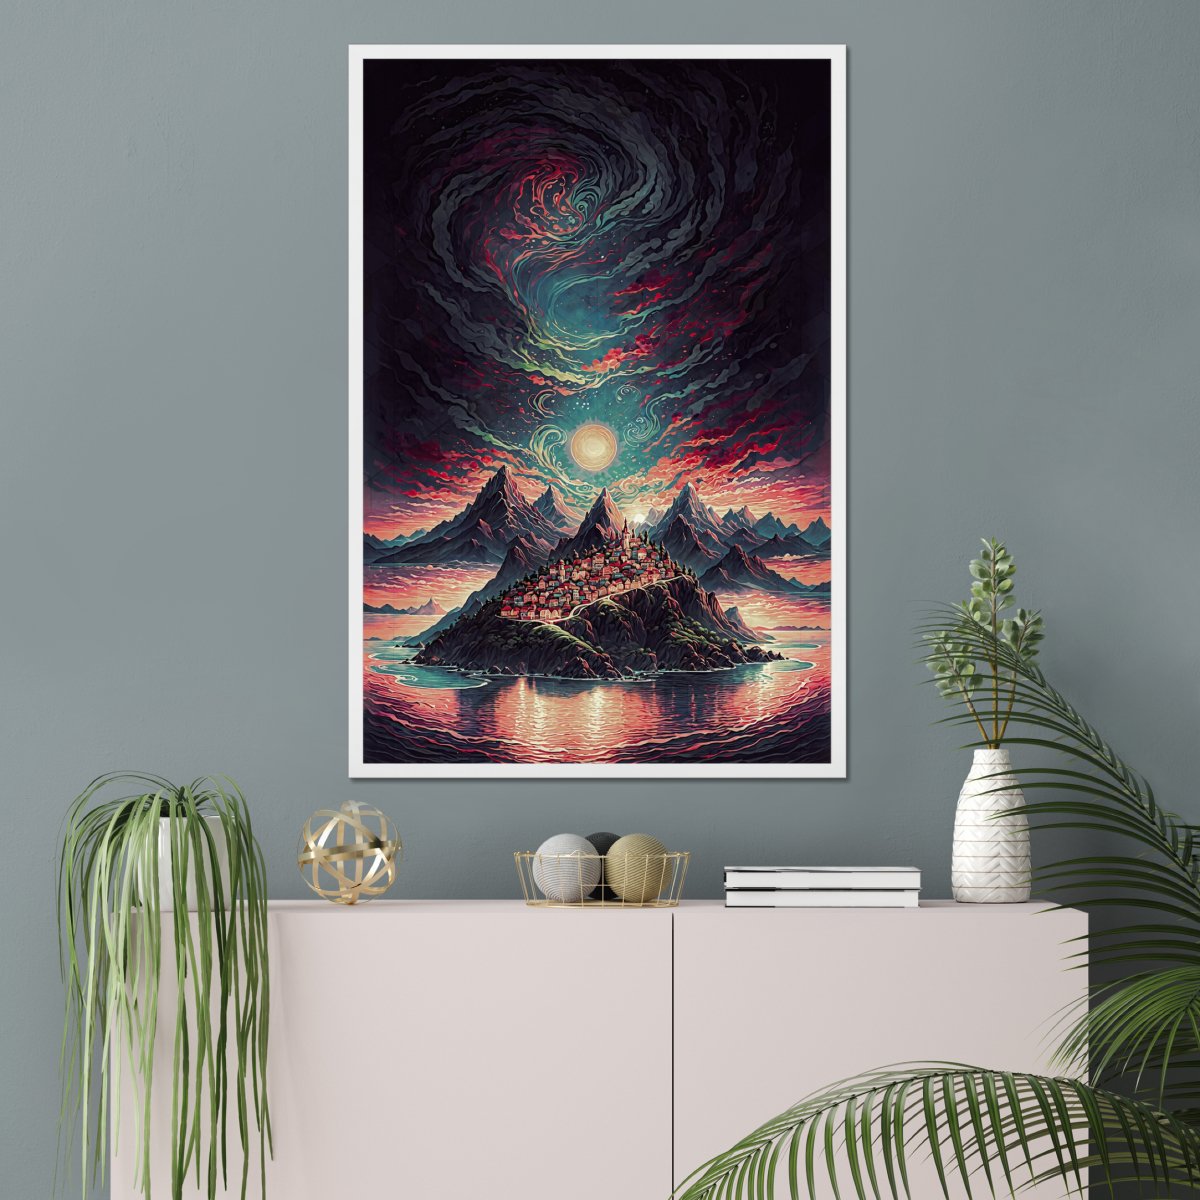 Flowing clouds - Art print - Poster - Ever colorful